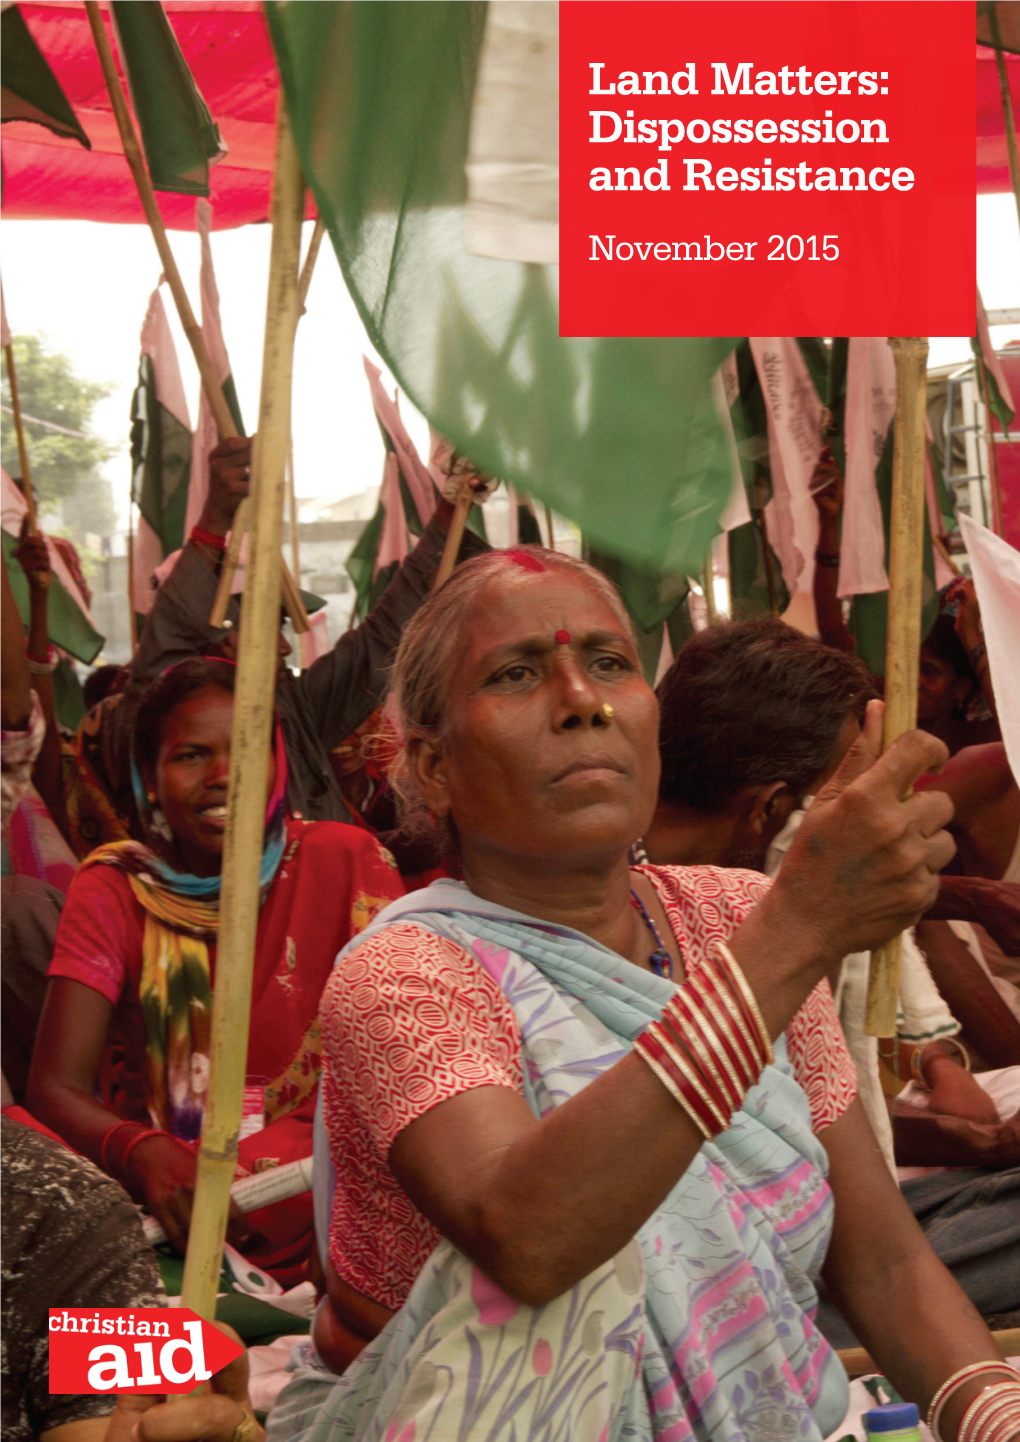 Land Matters: Dispossession and Resistance November 2015 Poverty Is an Outrage Against Humanity